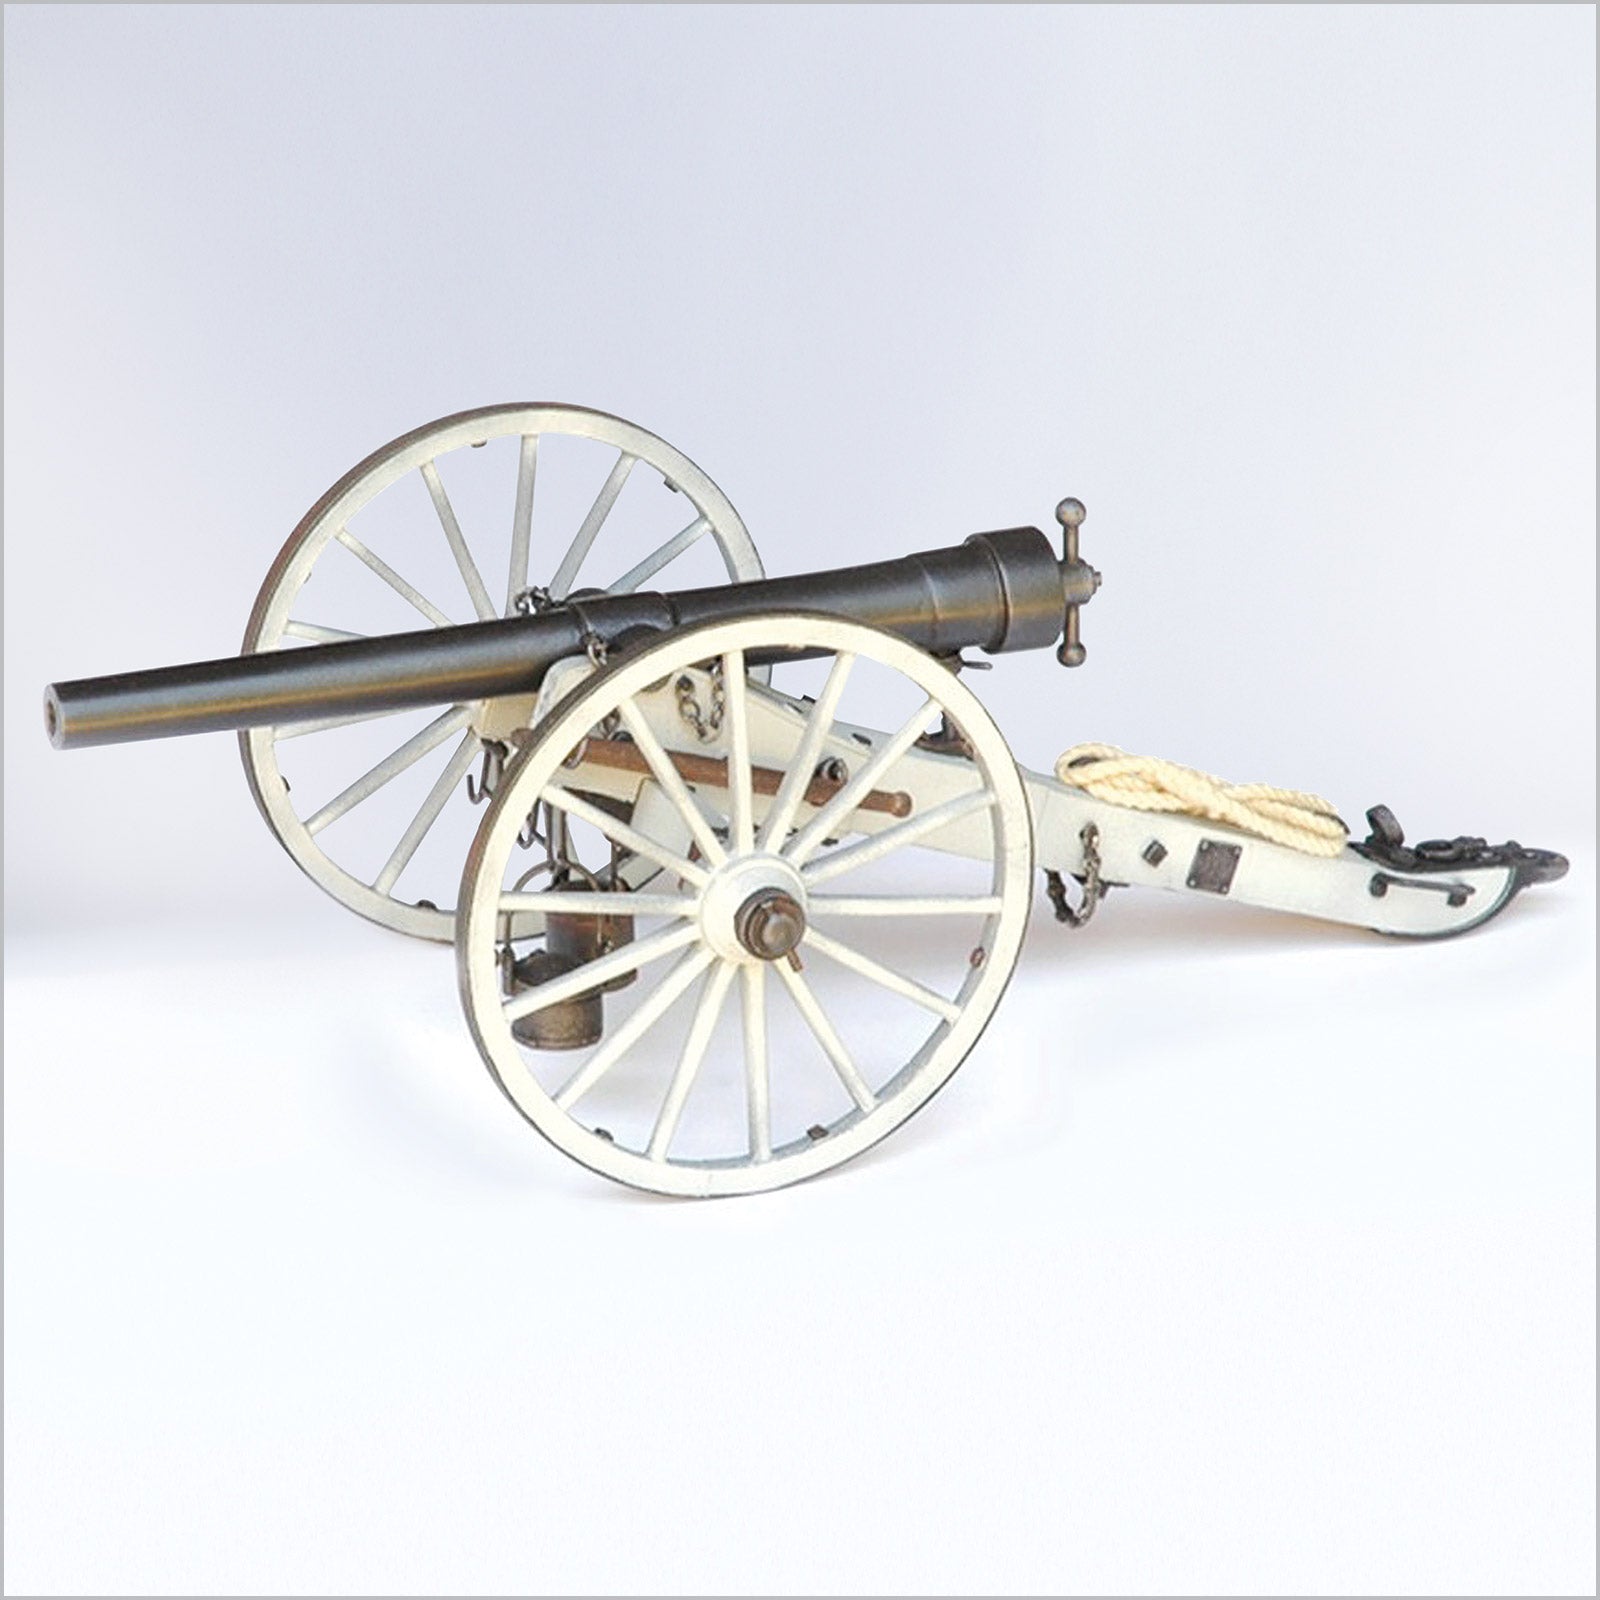 Guns of History Whitworth Cannon 12 - Pounder Wooden Model Kit, 1:16 Scale